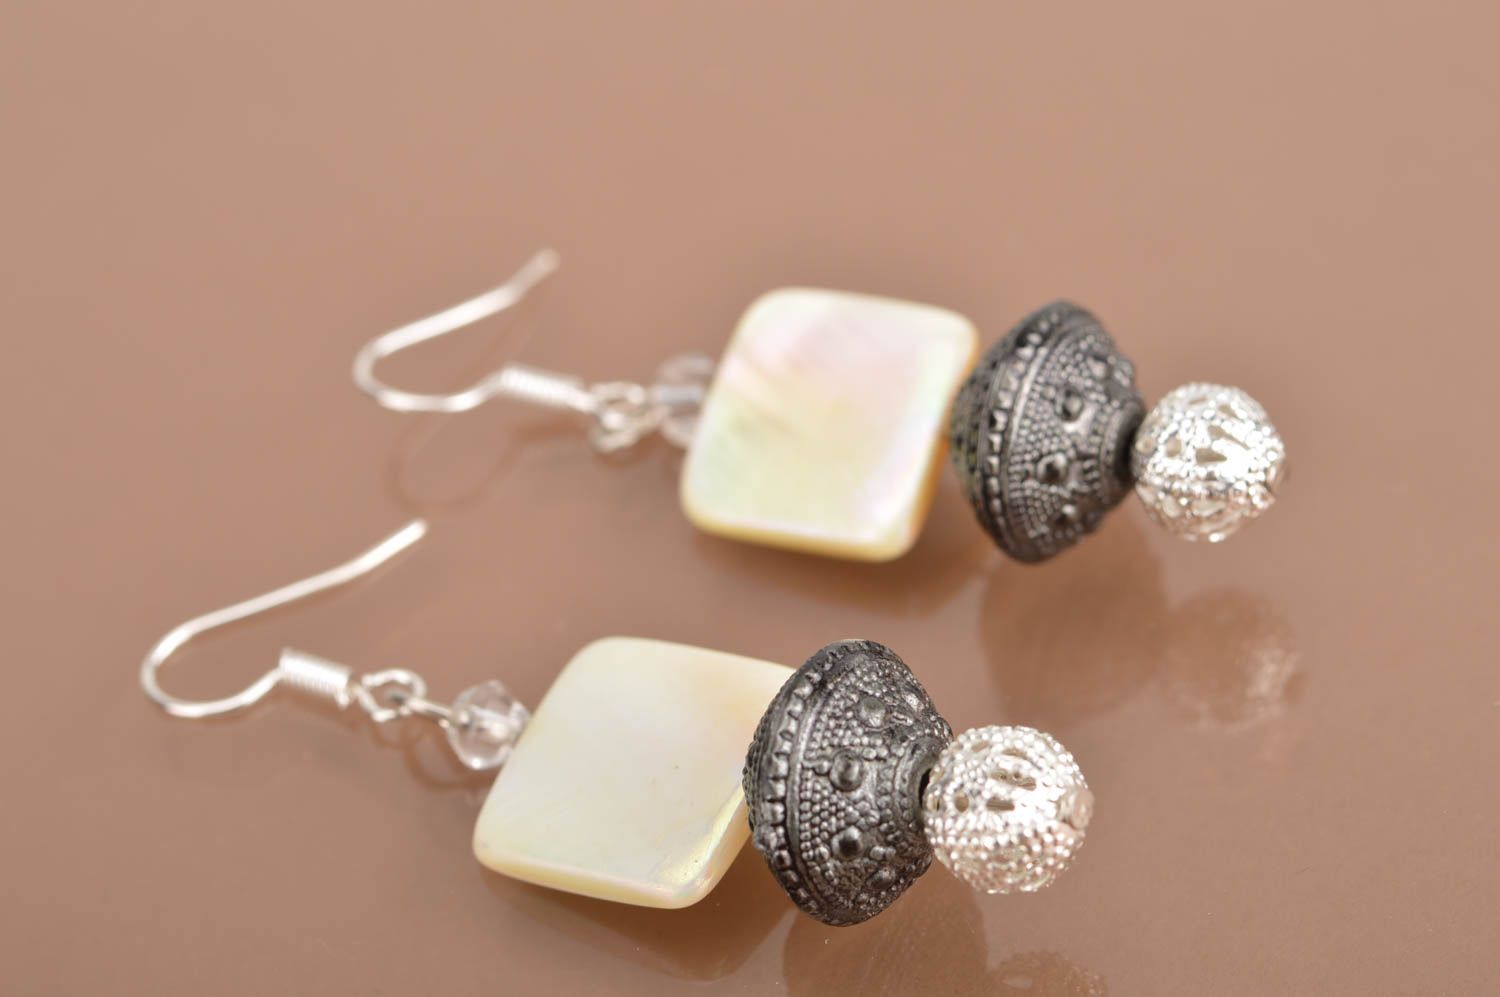 Designer earrings with charms handmade stylish accessory evening jewelry photo 5